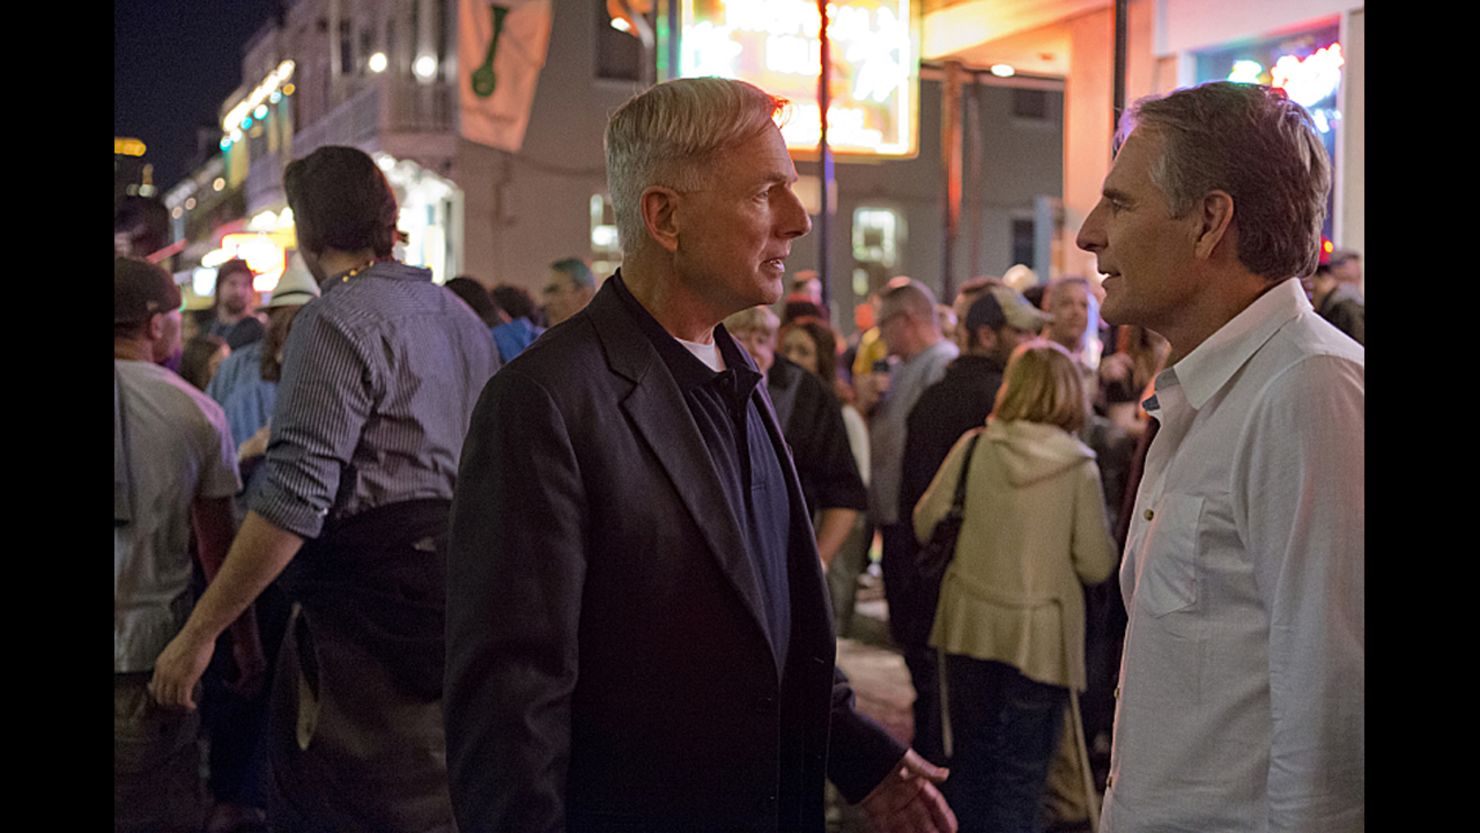 Mark Harmon (left) and Scott Bakula star in CBS' "NCIS" spinoff "NCIS: New Orleans"